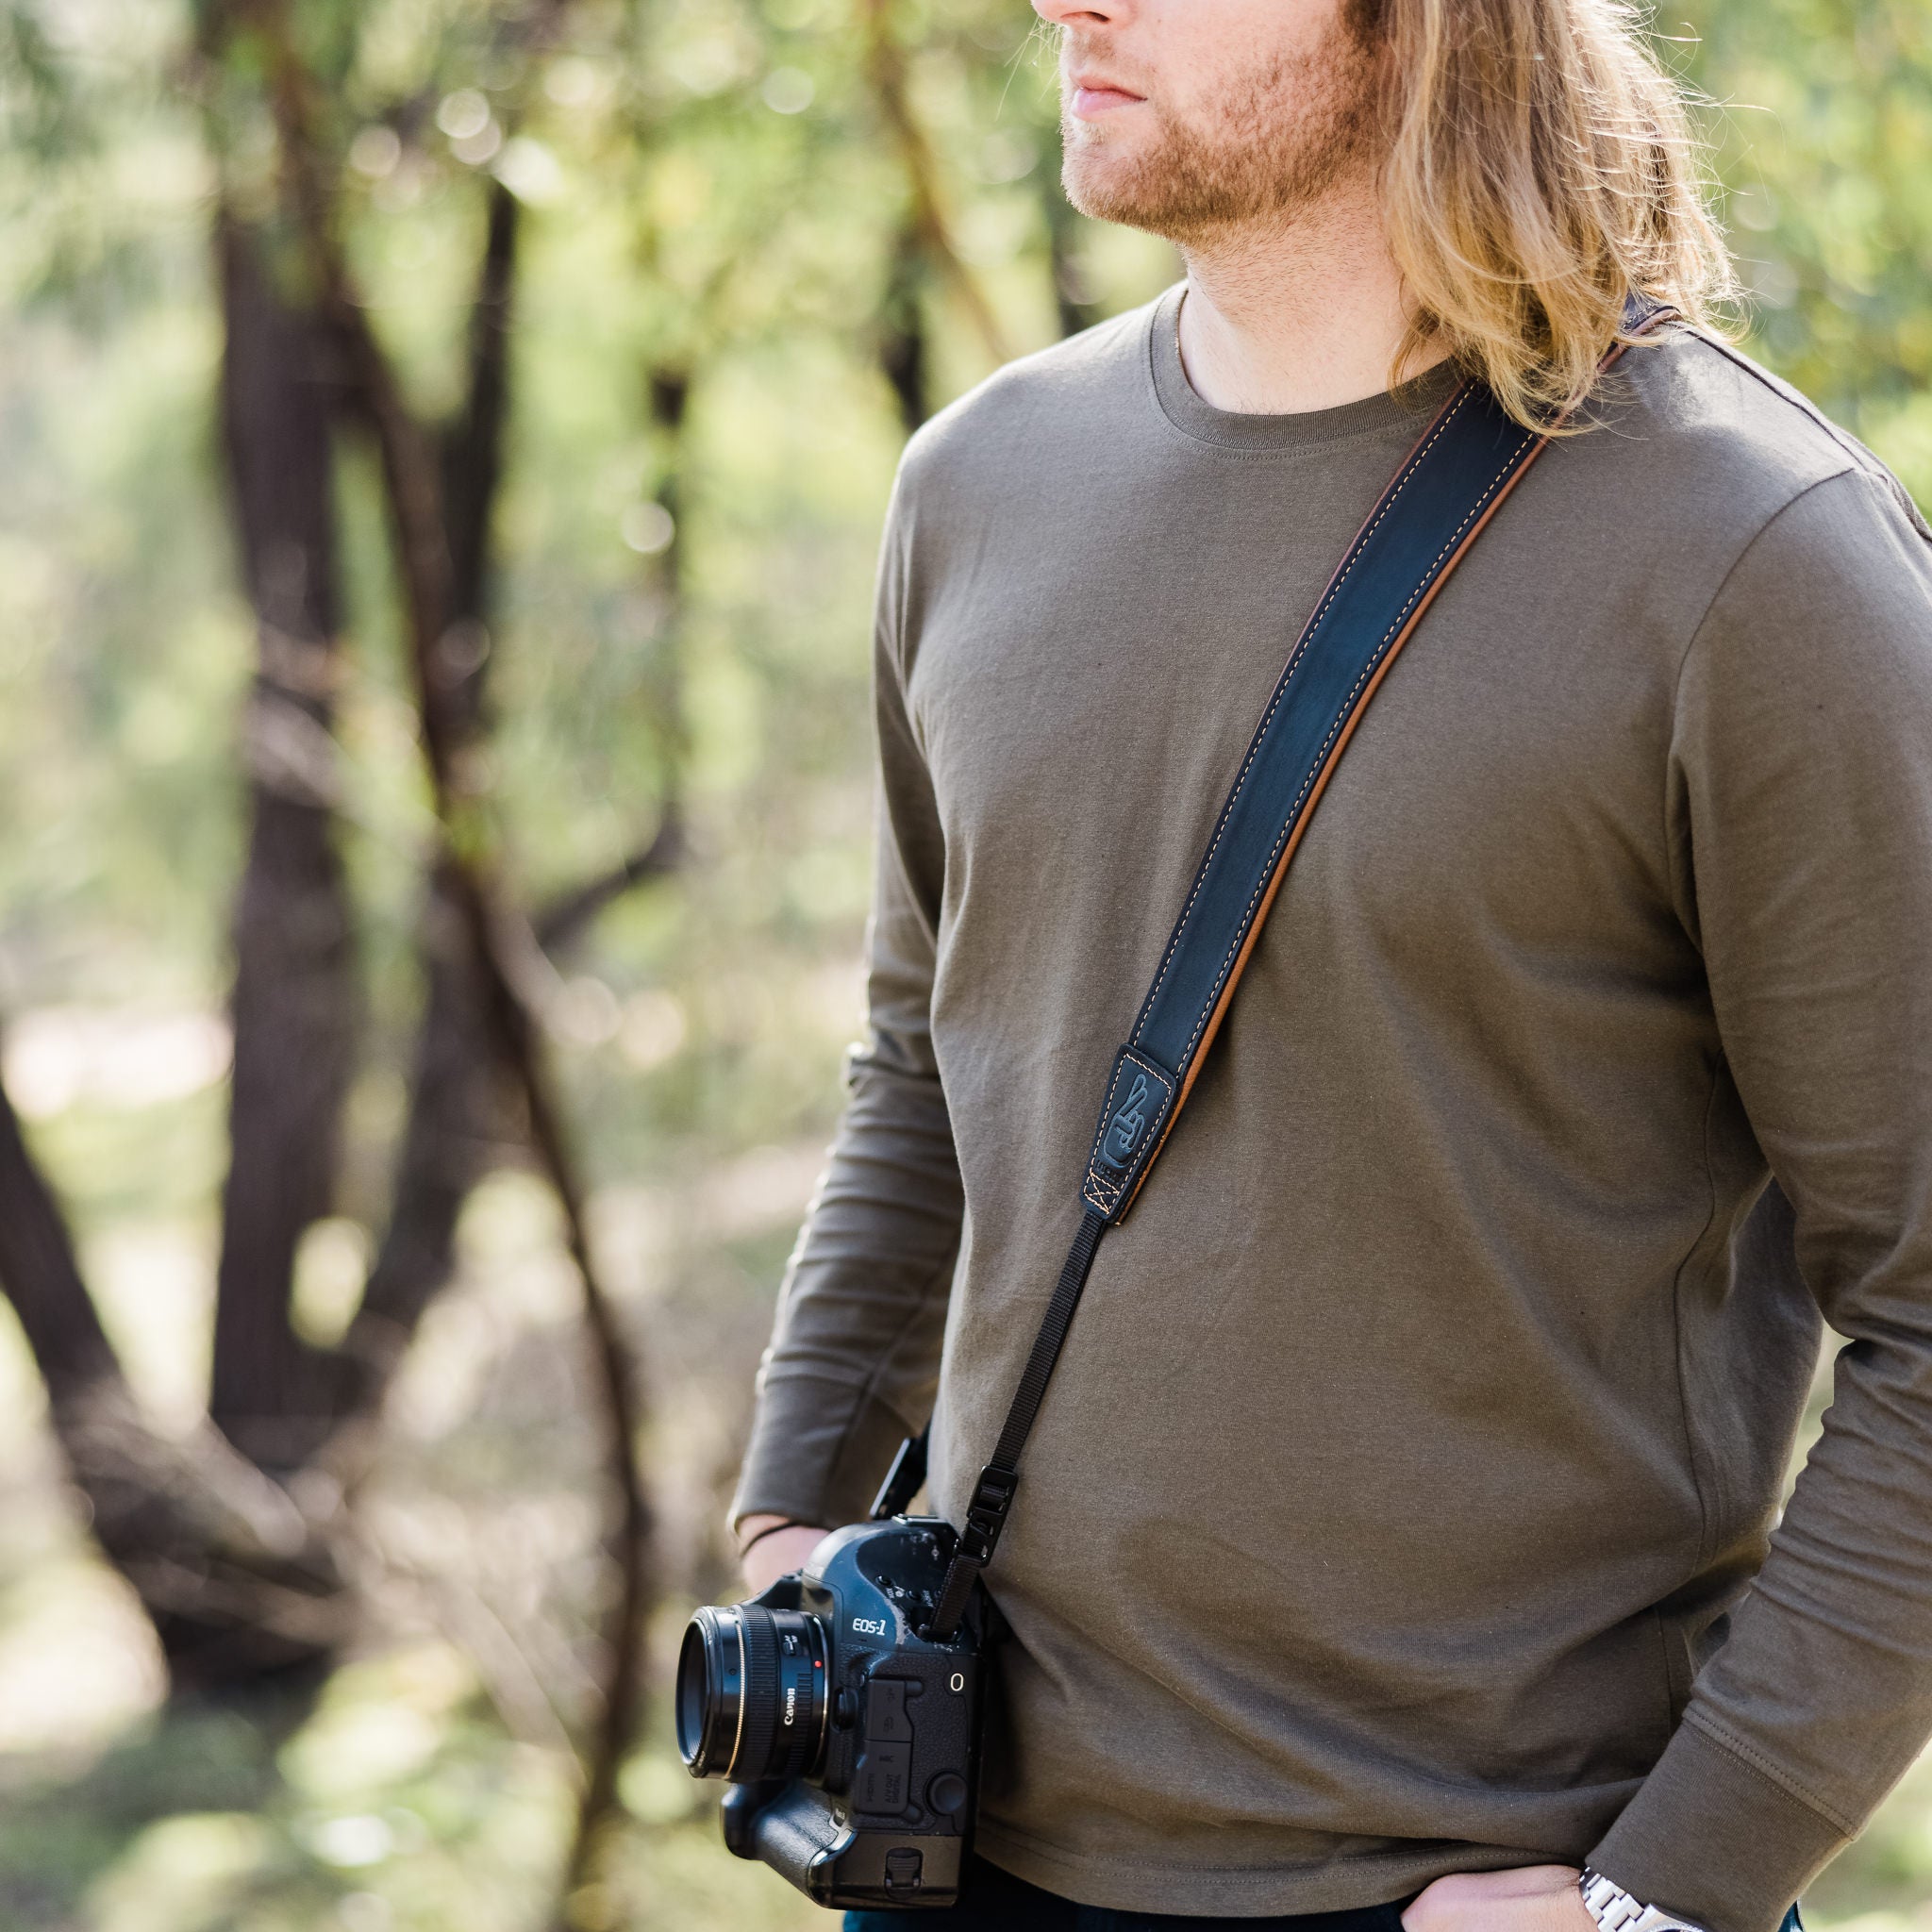 Photographer with leather lucky camera strap slung across body